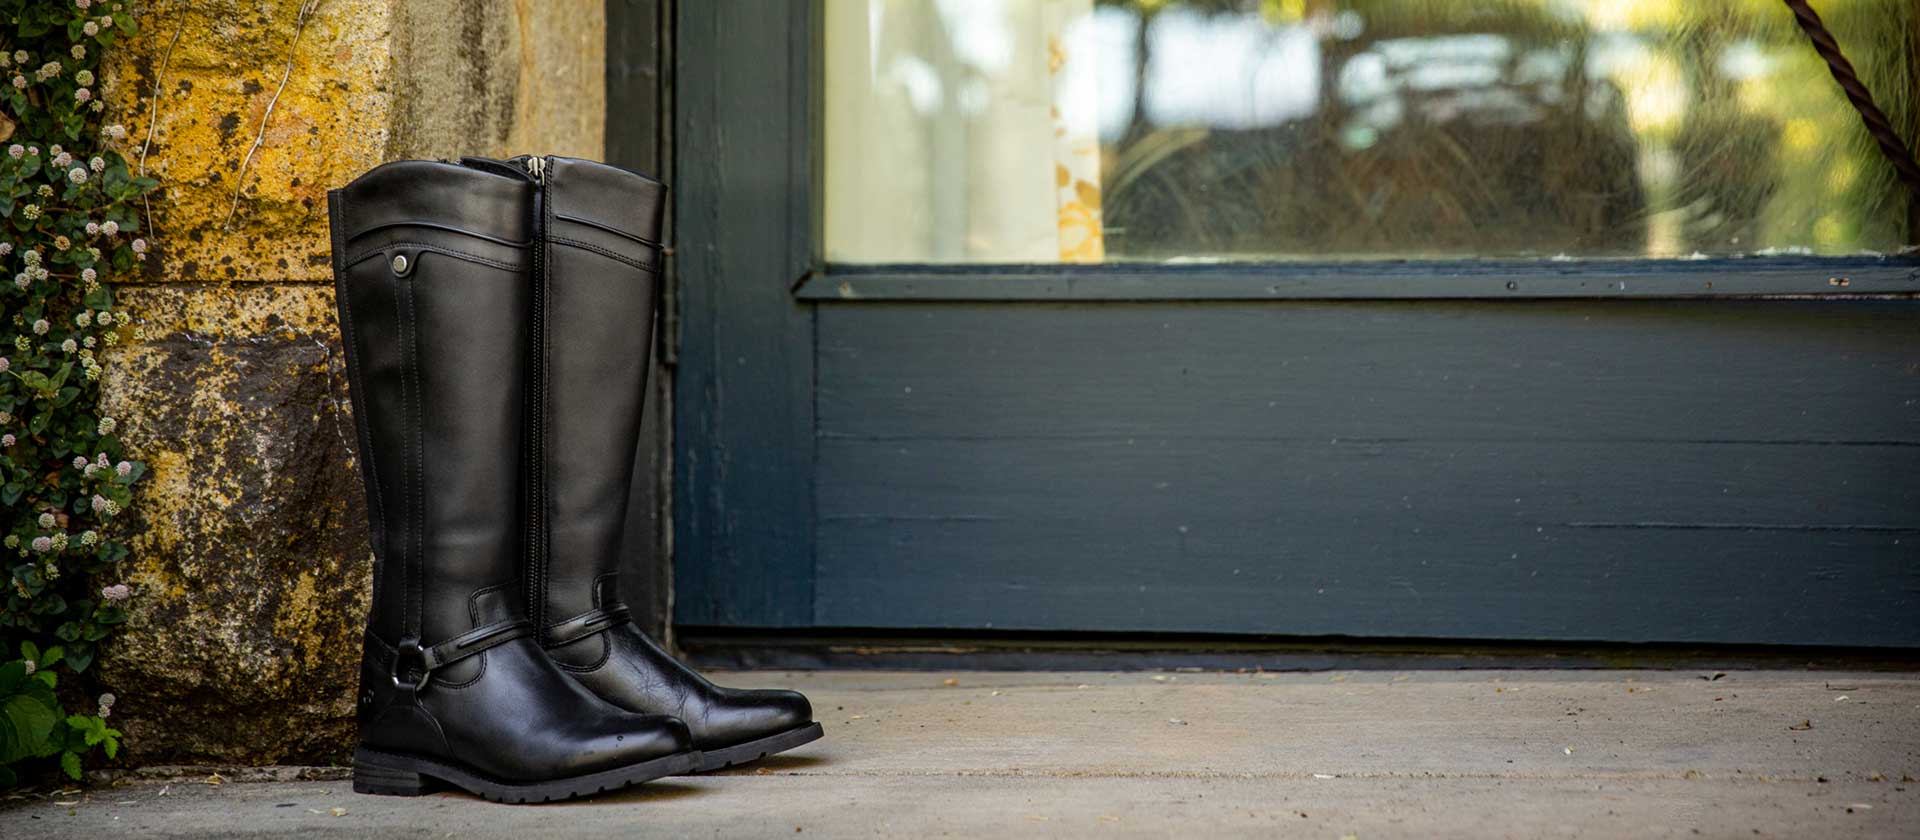 Black wellies sitting on the ground next to a stone wall and a green door